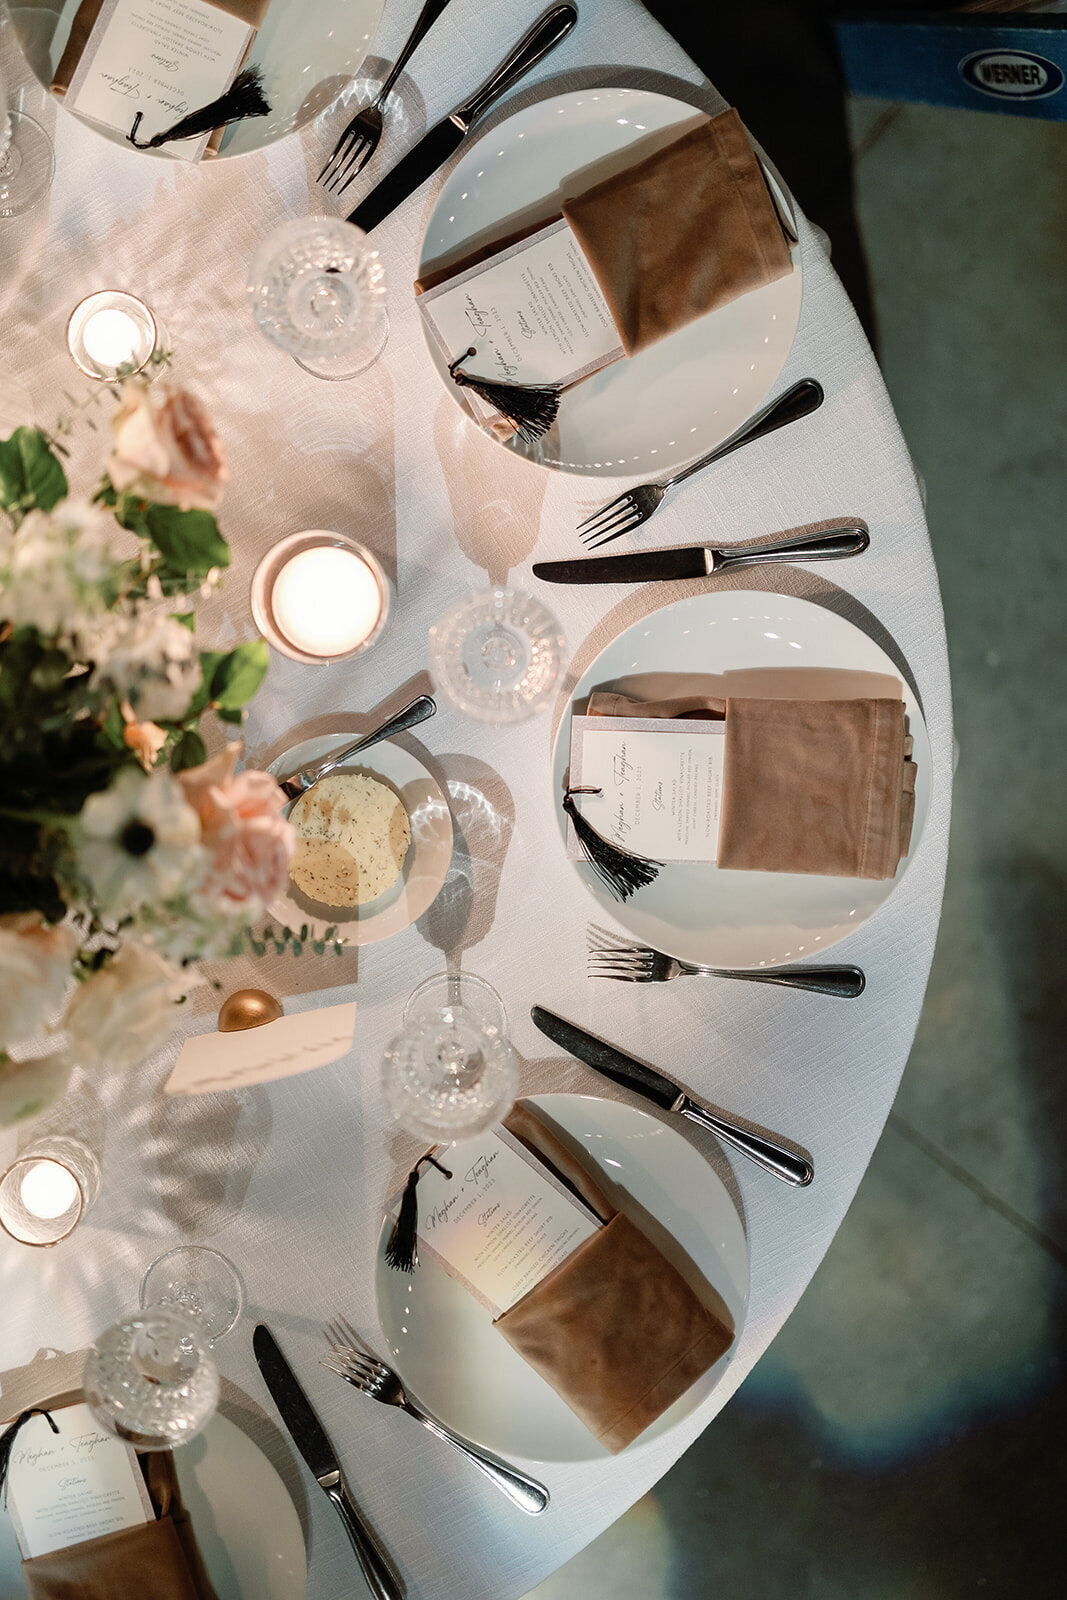 Kate-Murtaugh-Events-warehouse-wedding-planner-moody-place-setting